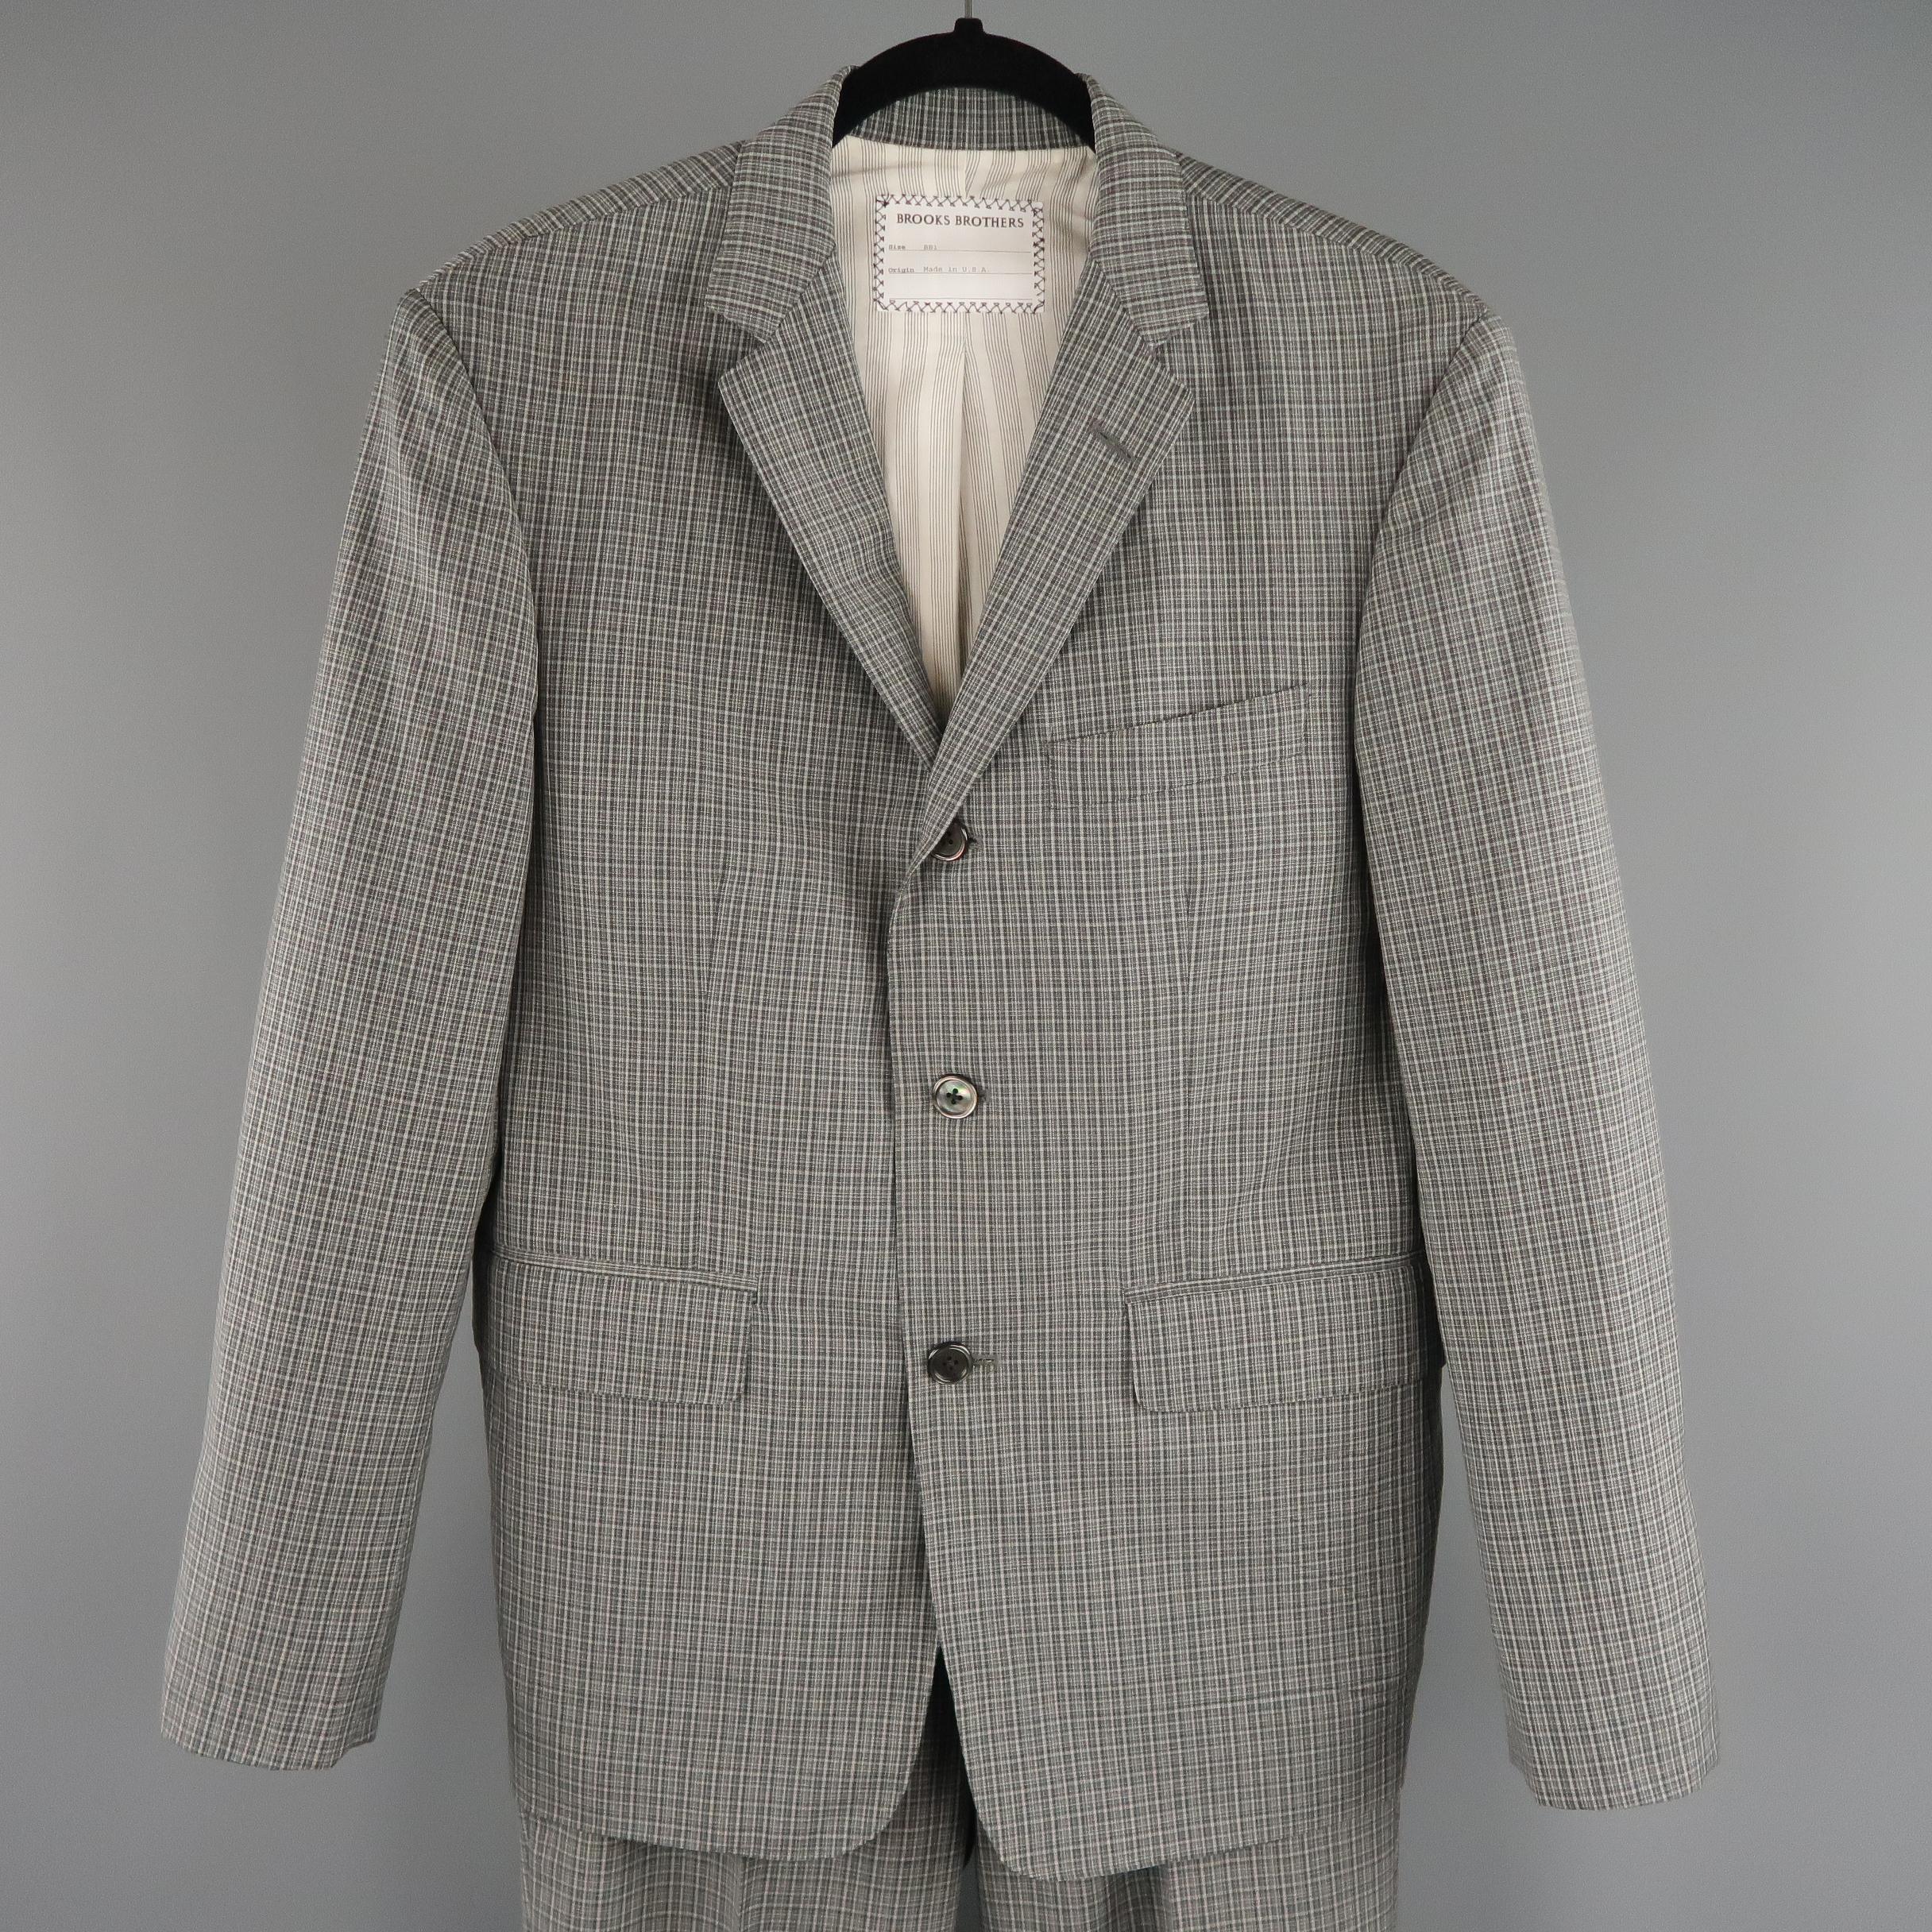 This two piece BROOKS BROTHERS suit comes in dark gray plaid wool  and includes a single breasted, three button sport coat with notch lapel and matching flat front, cuffed trousers. Made in USA.
 
Excellent Pre-Owned Condition.
Marked: BB1
